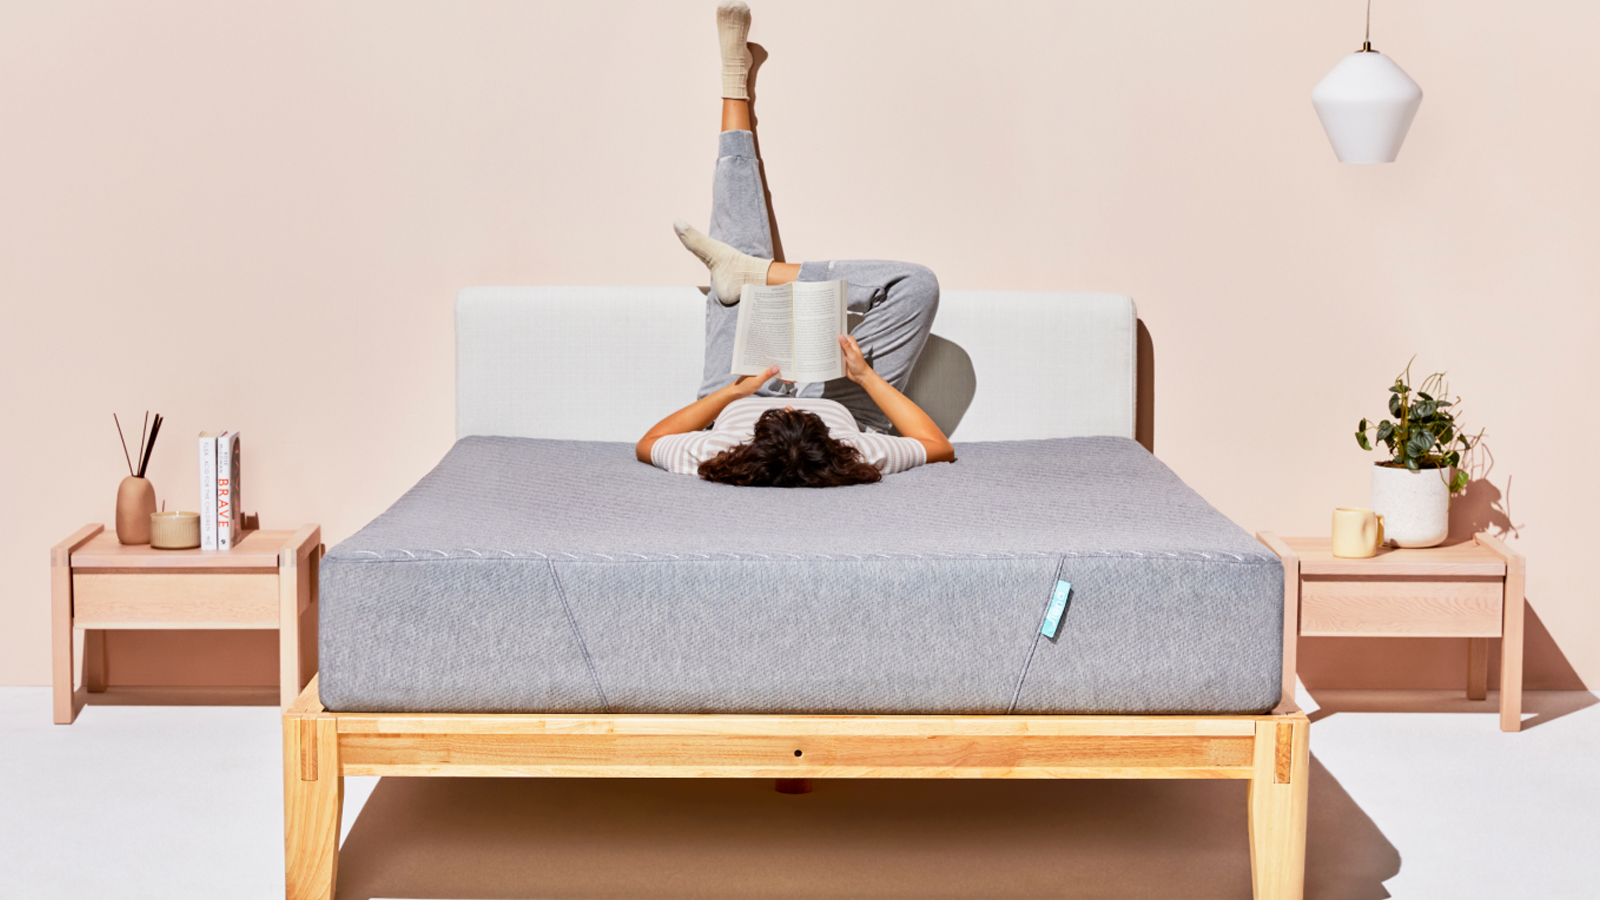 The best affordable mattress is the Siena Memory Foam mattress, featuring a person lying upside on the bed, with legs up the wall, reading a book